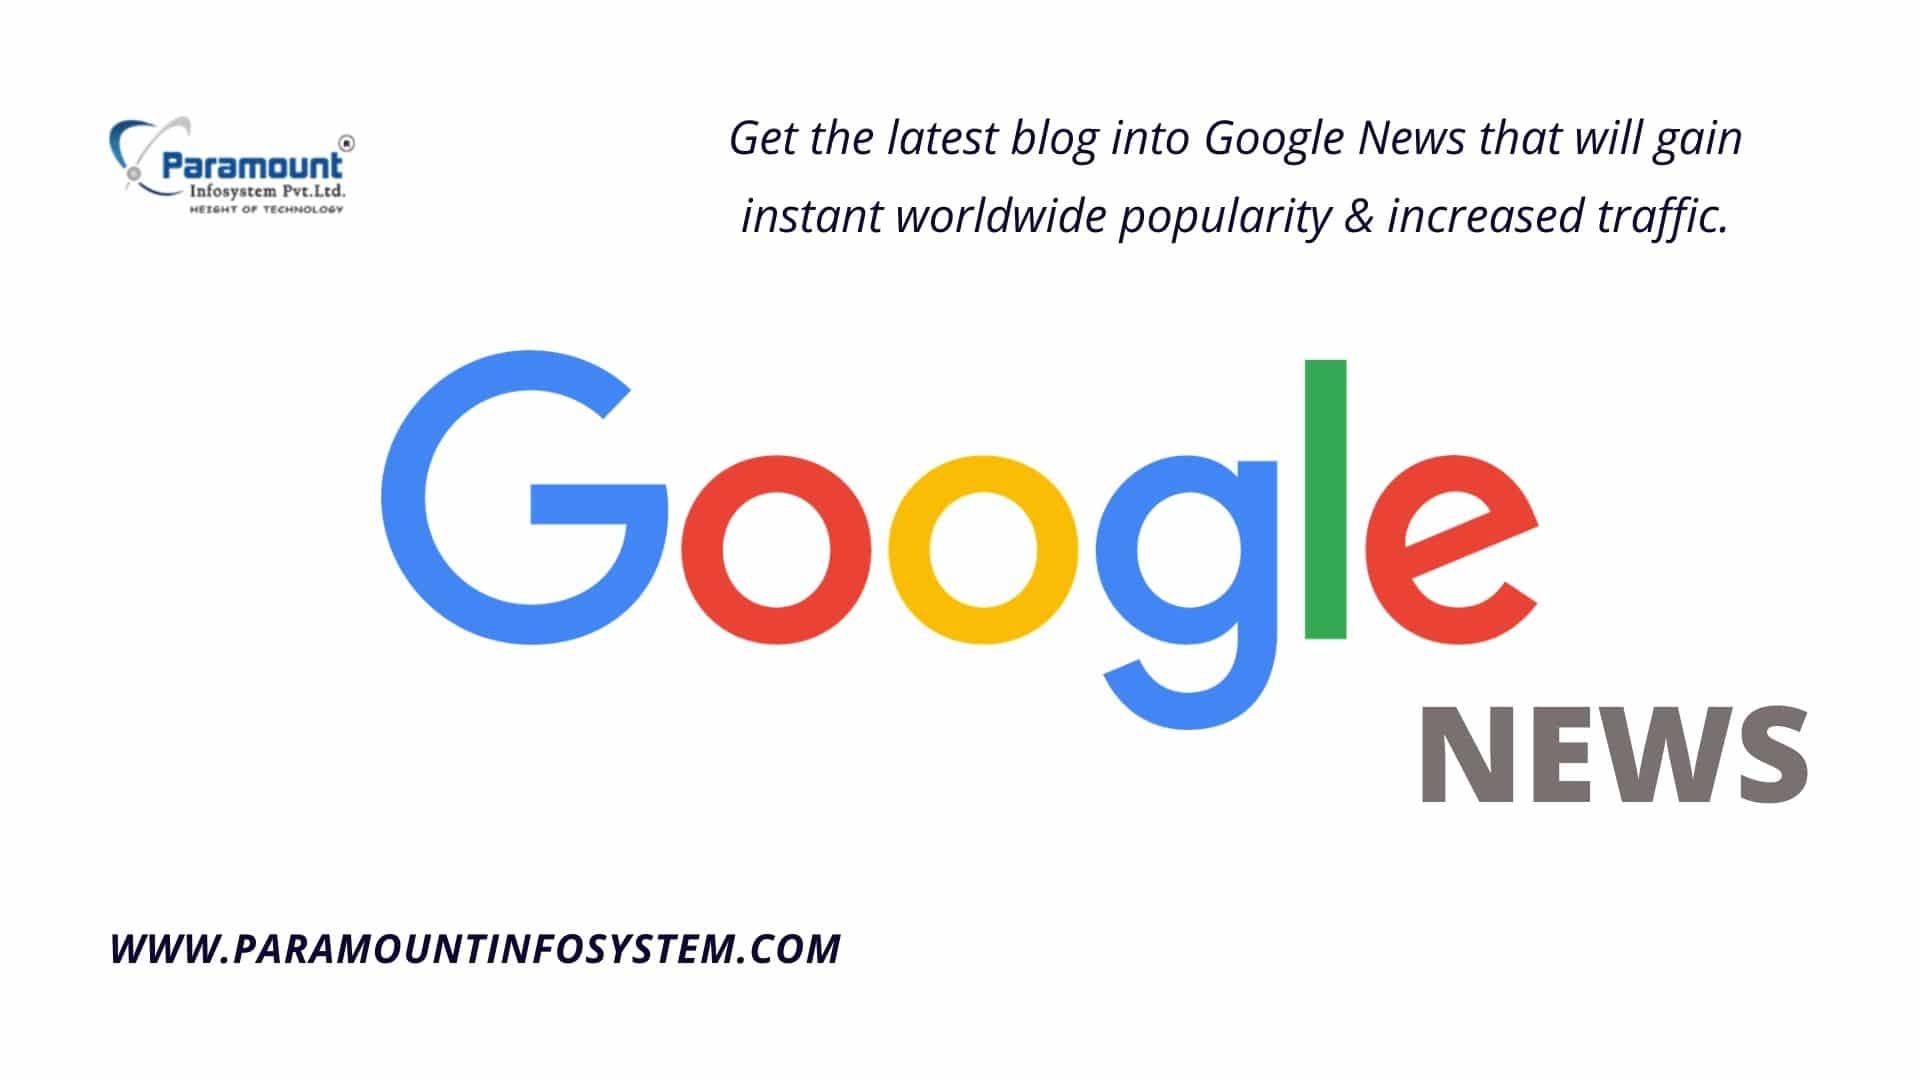 Get the Latest Blog of Paramount on Google News-b41d804e